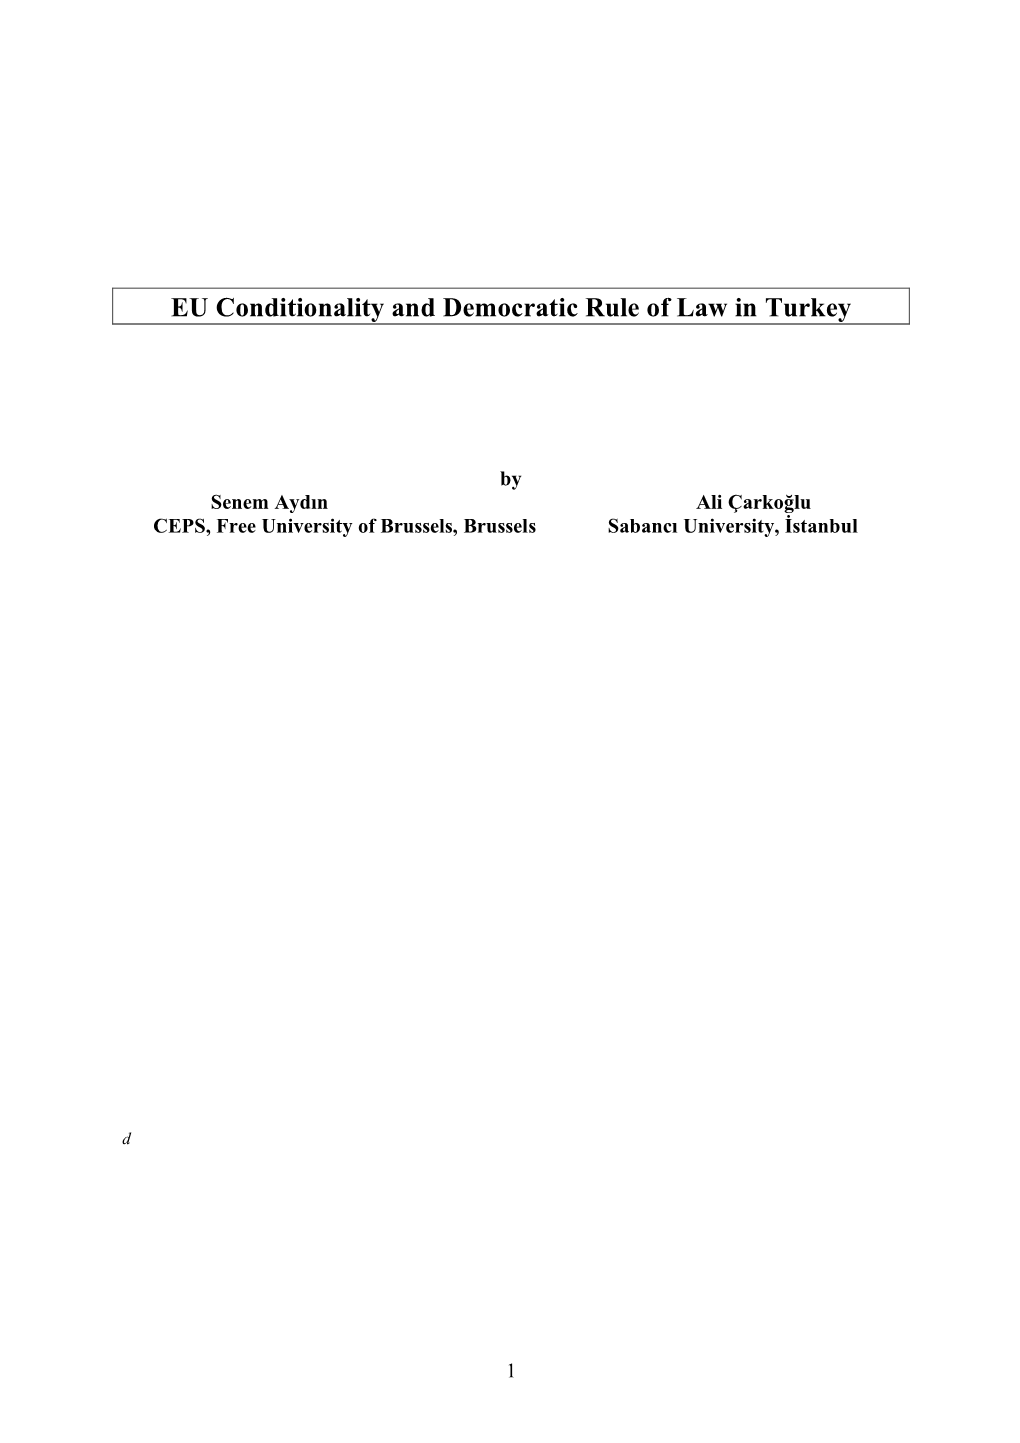 EU Conditionality and Democratic Rule of Law in Turkey